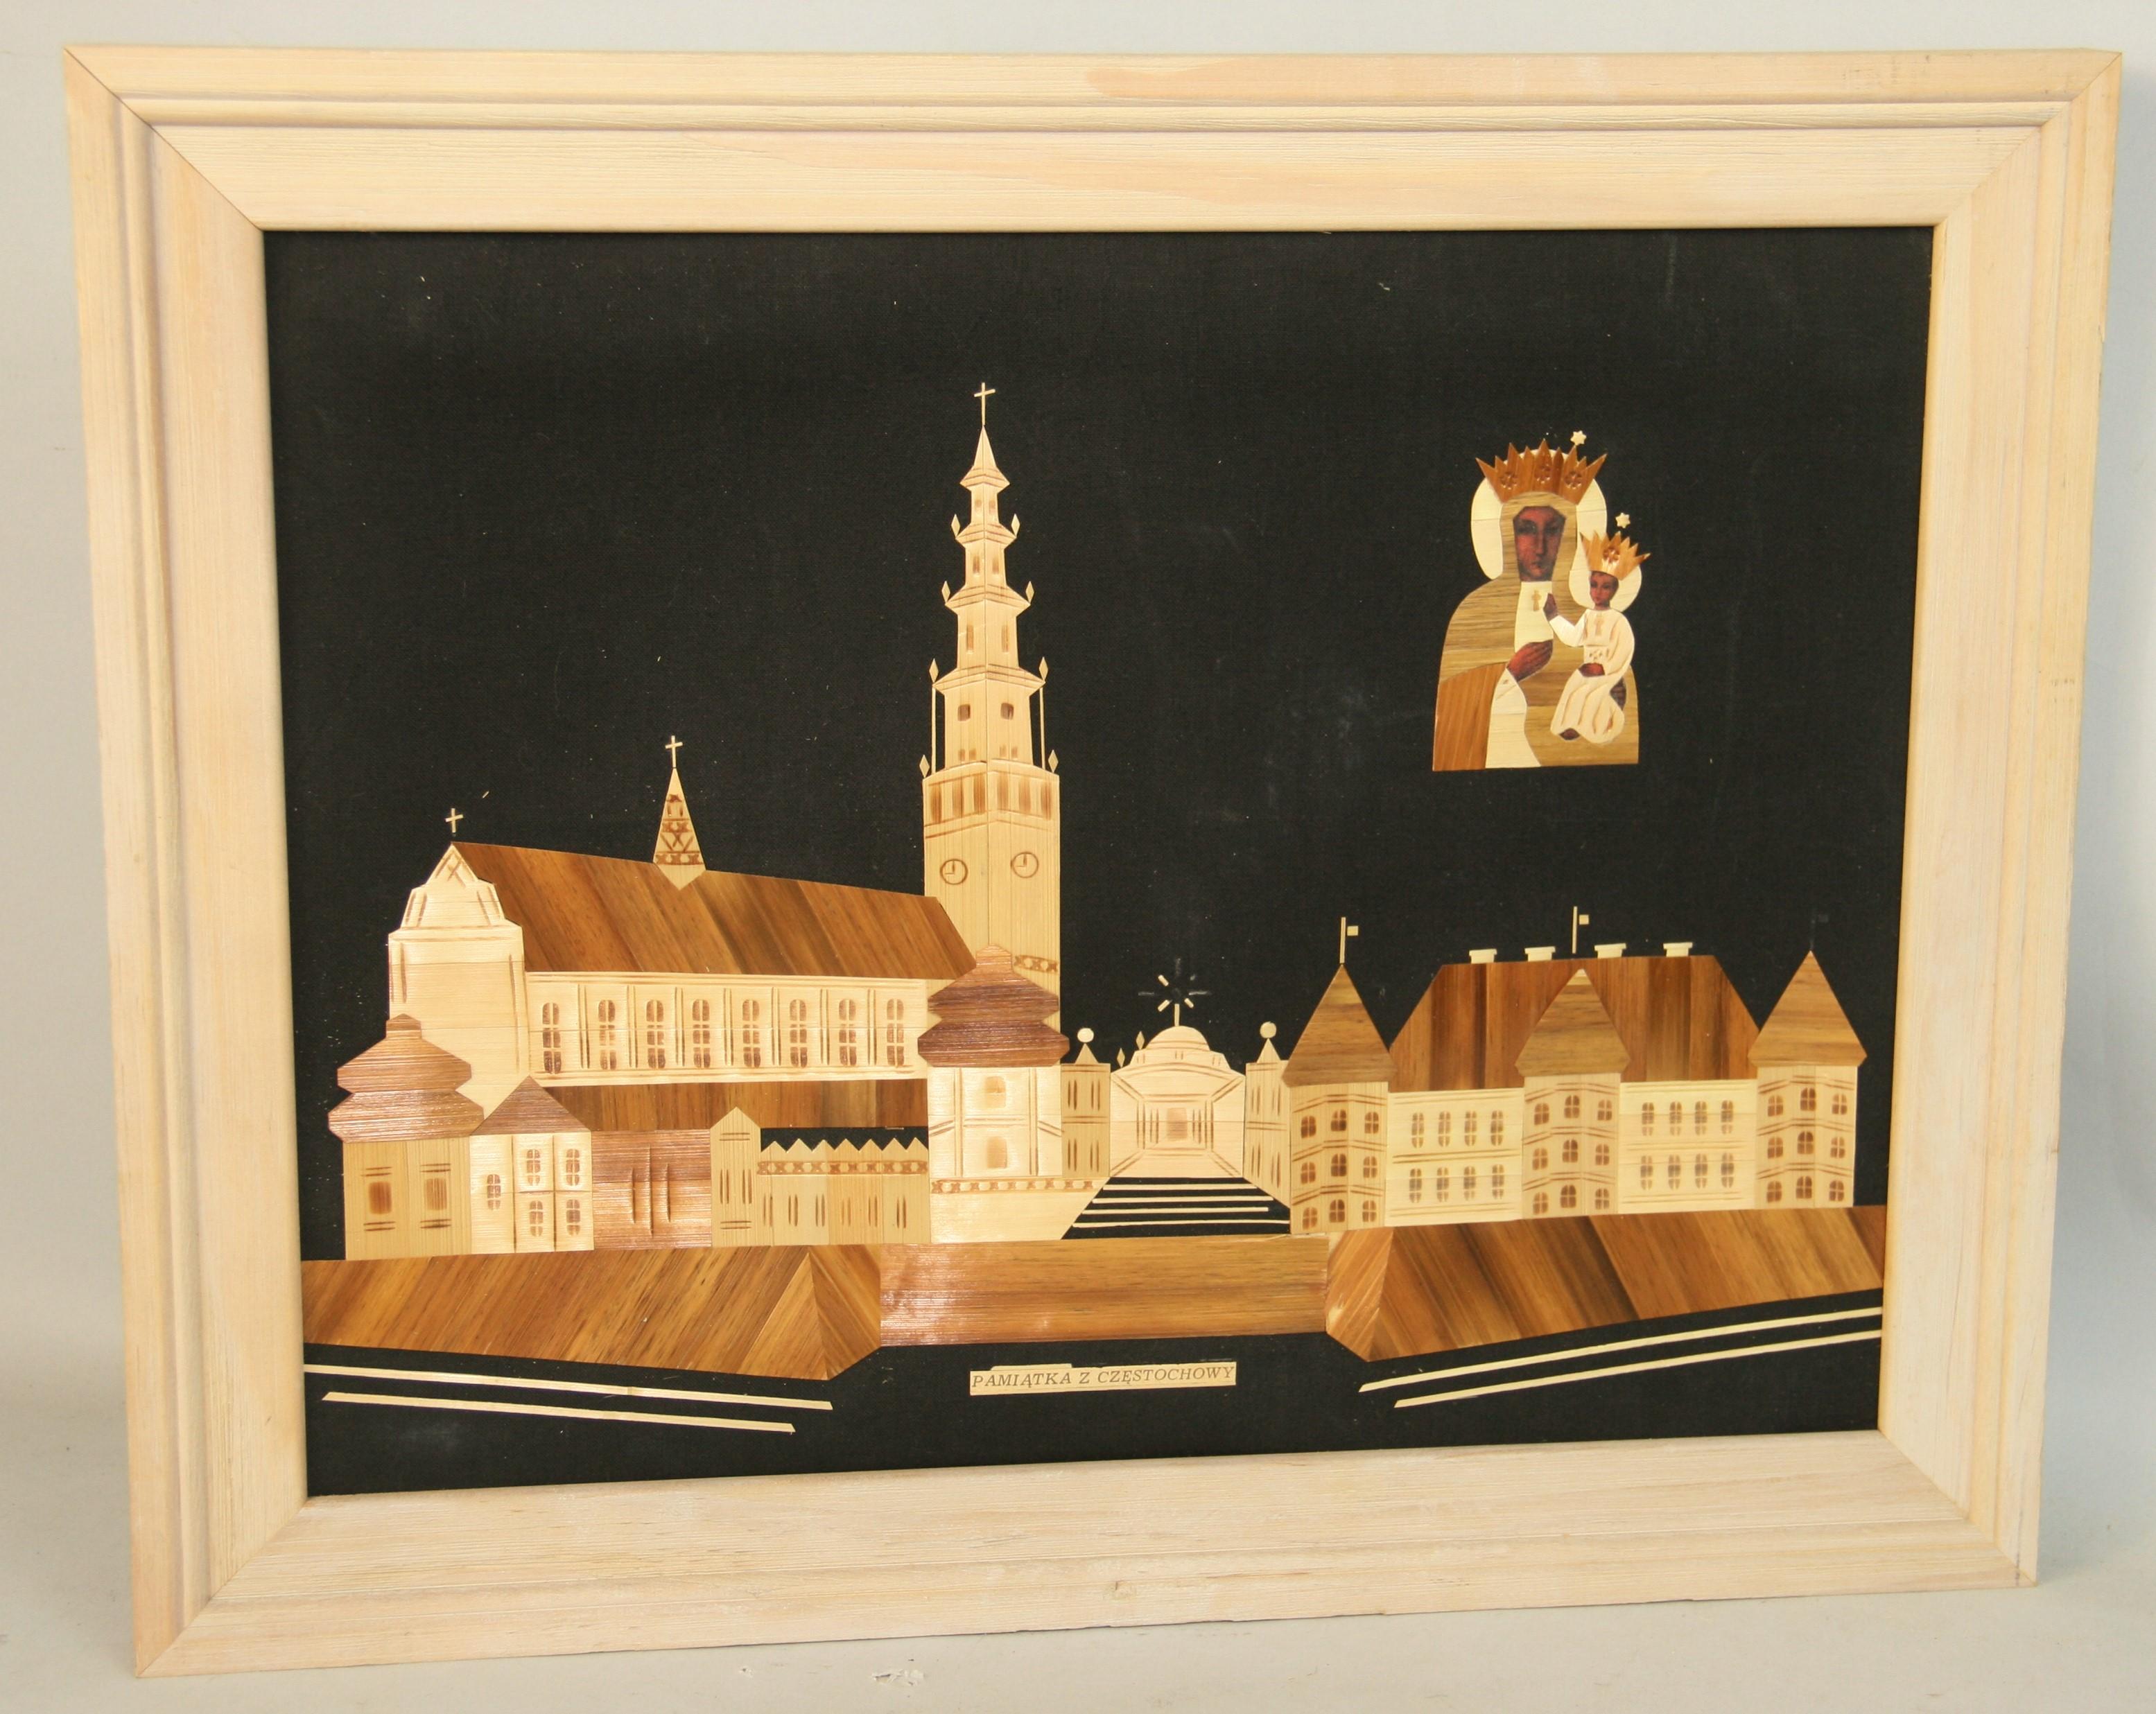 Vintage Polish Collage "Monument of the Black Madonna of Poland" - Mixed Media Art by Unknown